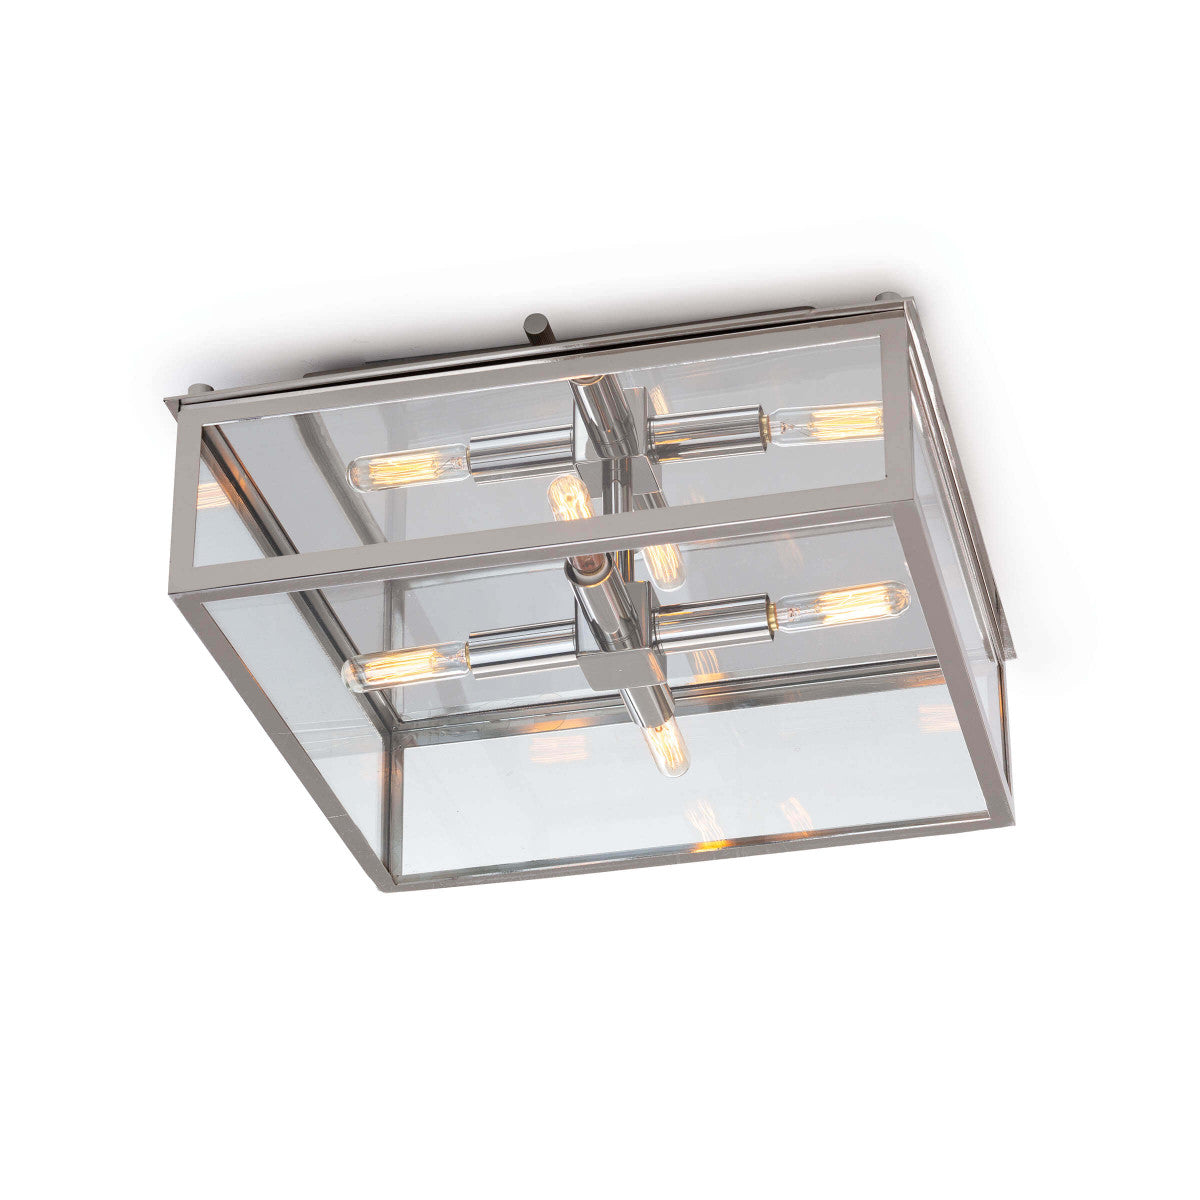 The modern silhouette and classic details of the Ritz Polished Nickel Flush Mount make a timeless design. We love the warm glow and elegance this can bring to any bathroom, entryway, or hallway.   Size: 14.5"w x 14.5"d x 5.75"h Material: Glass